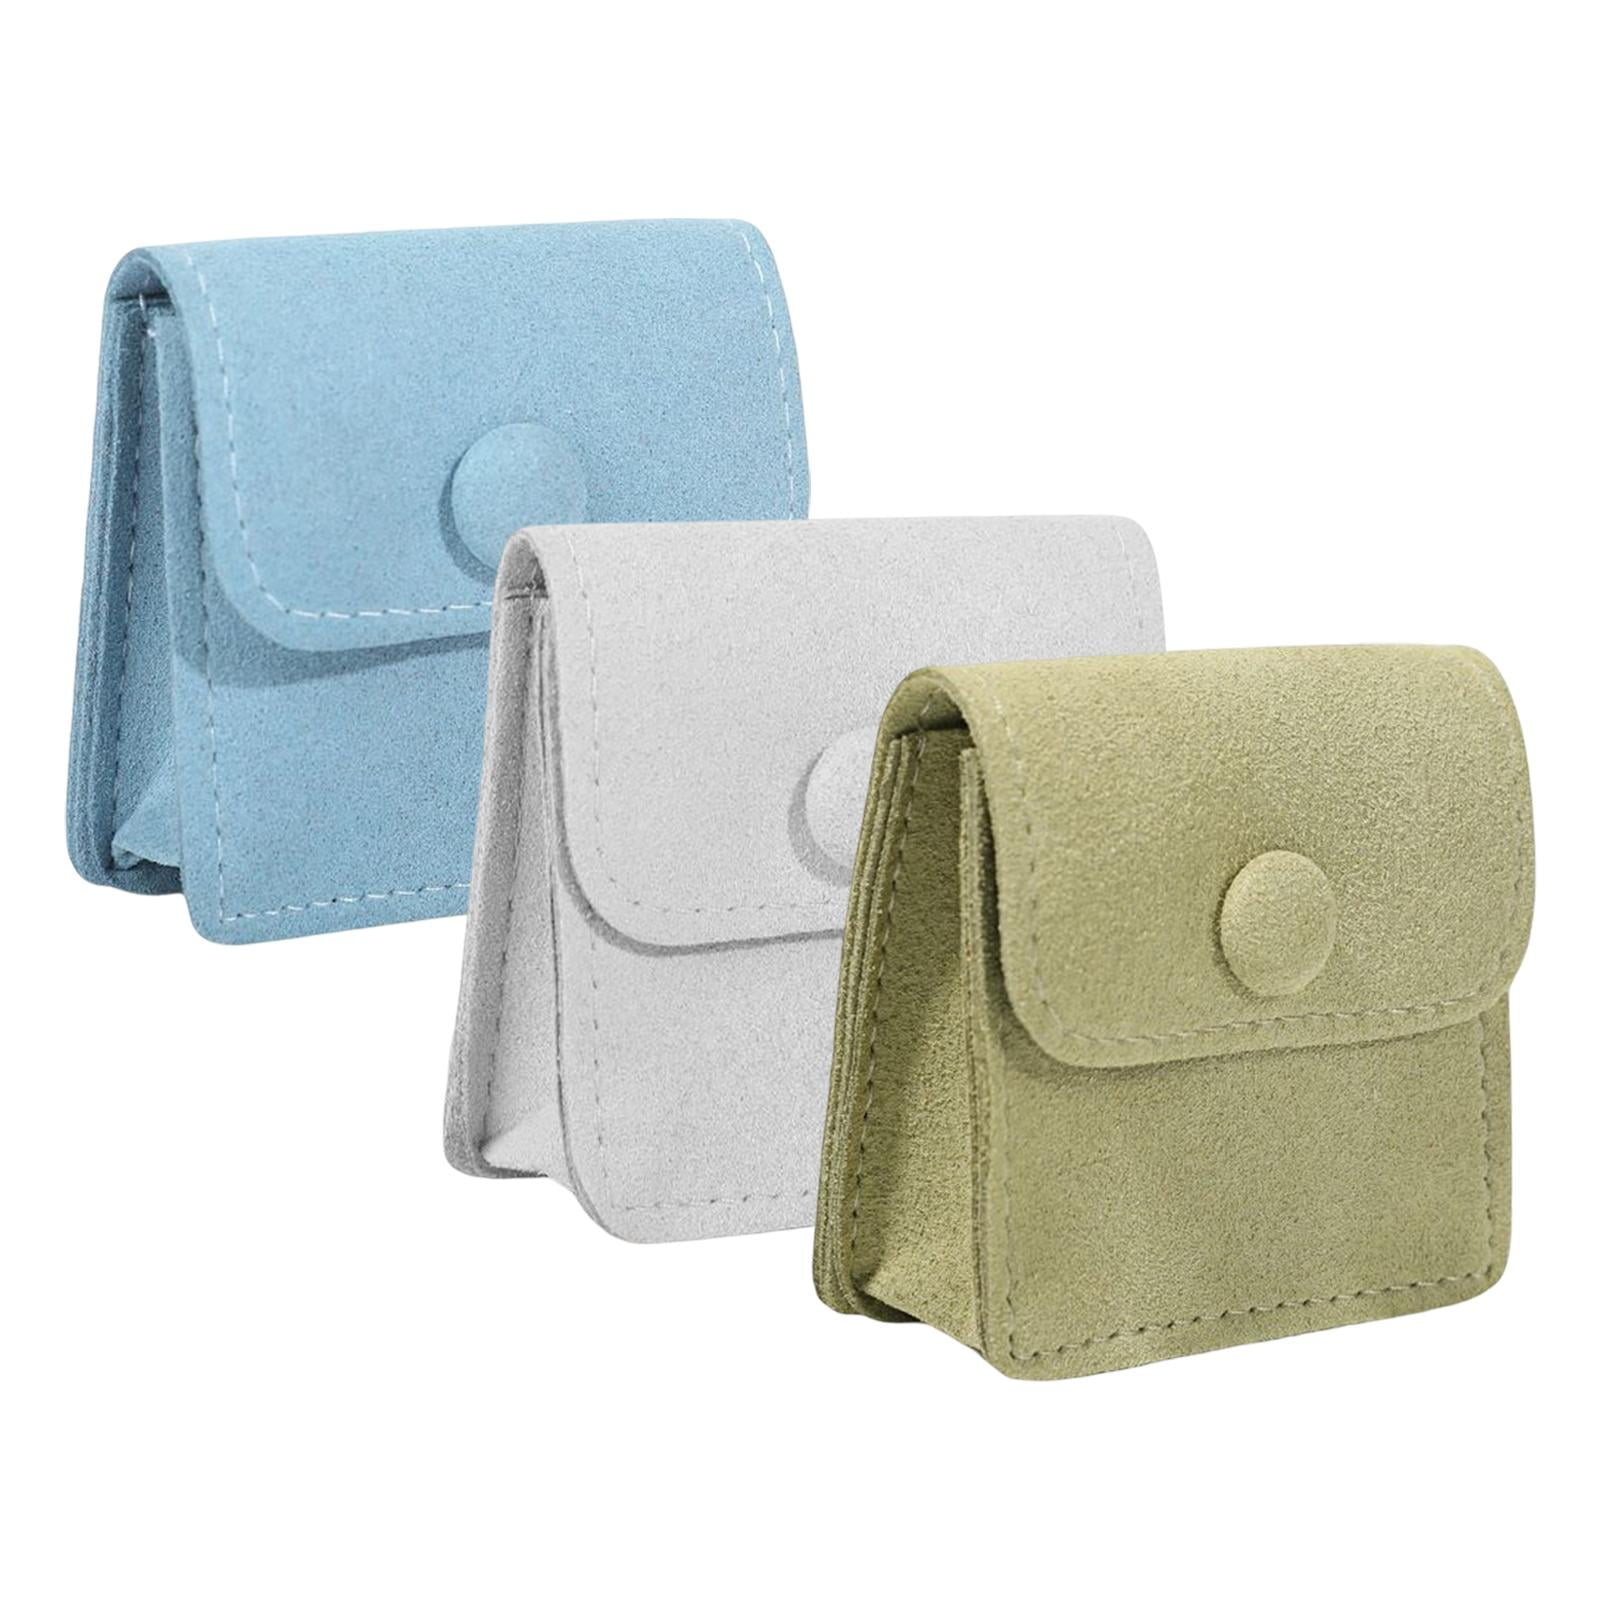 PH PandaHall 4 Colors Jewelry Storage Bags, PU Leather Snap Purse Pouch Bag  Soft Jewelry Gift Bags with Snap Buttons for Earring Necklace Ring Watch